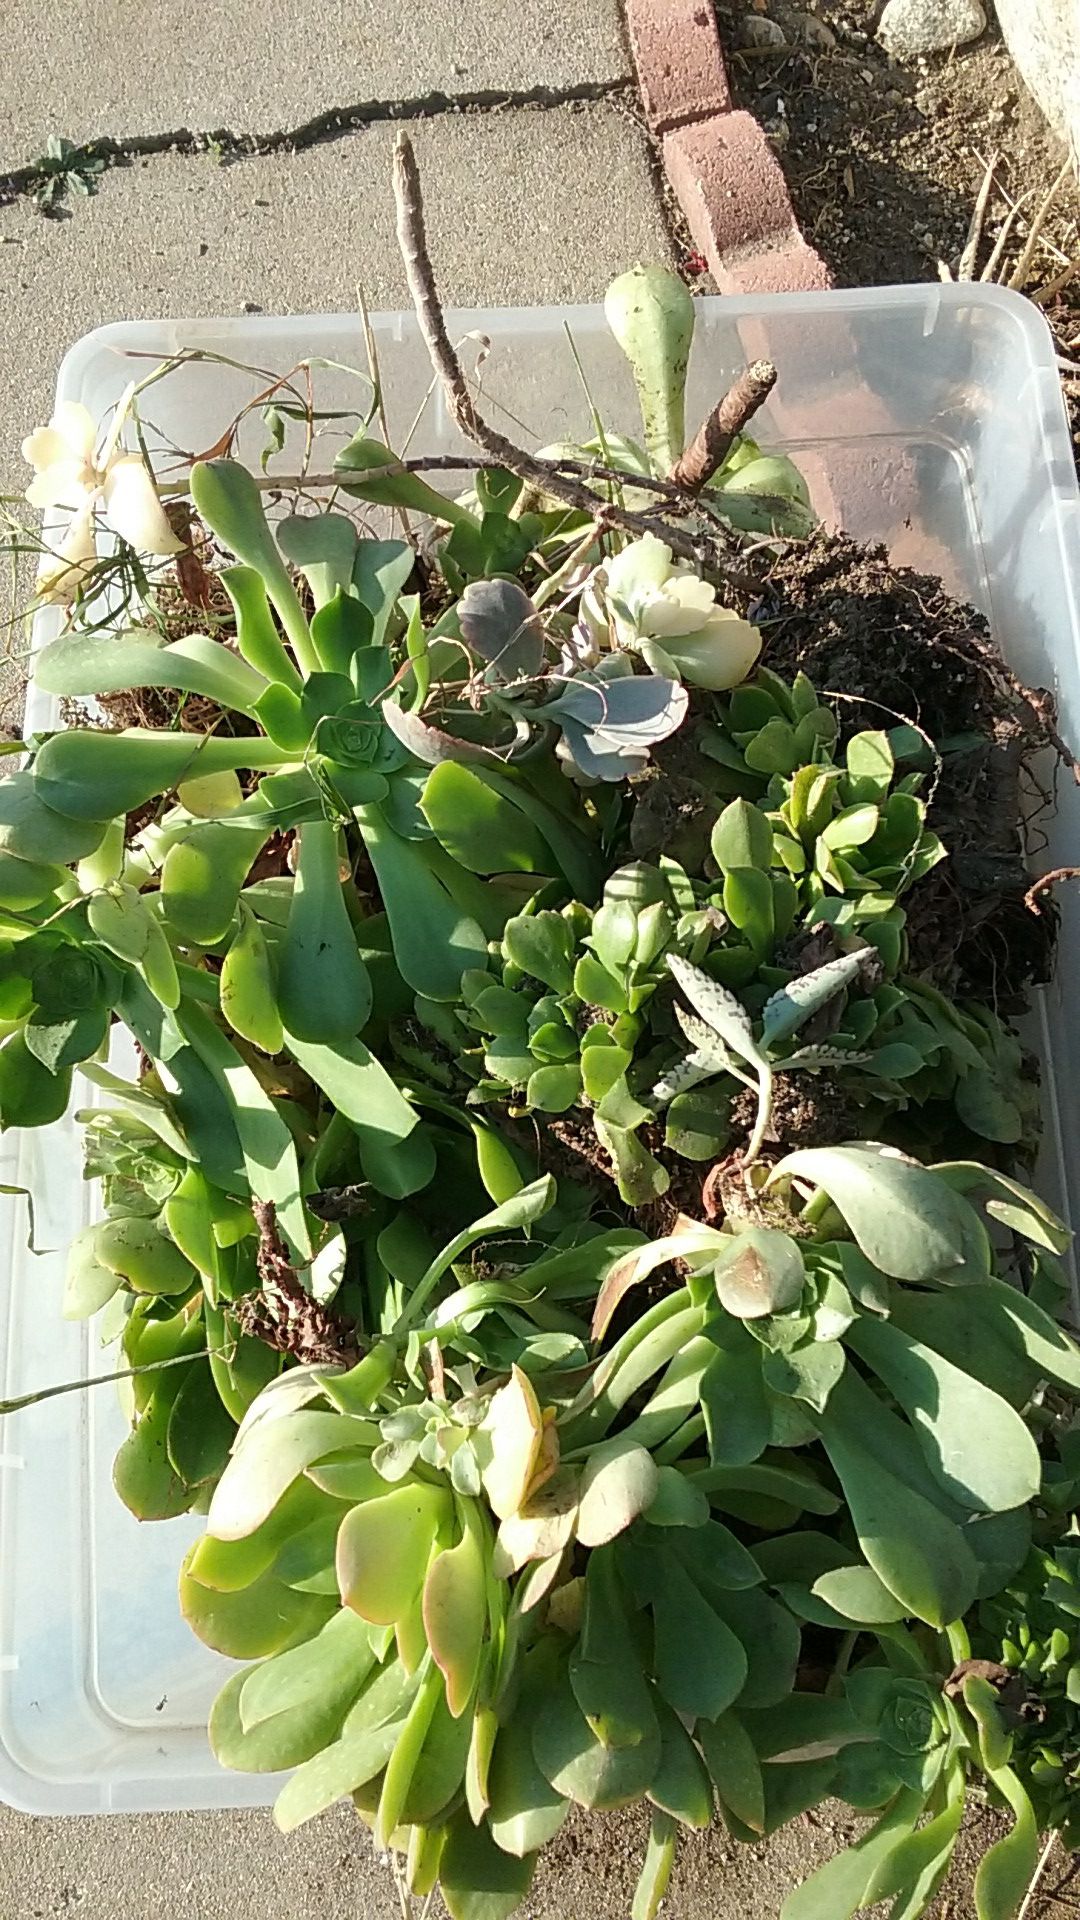 Free succulents need a good home.